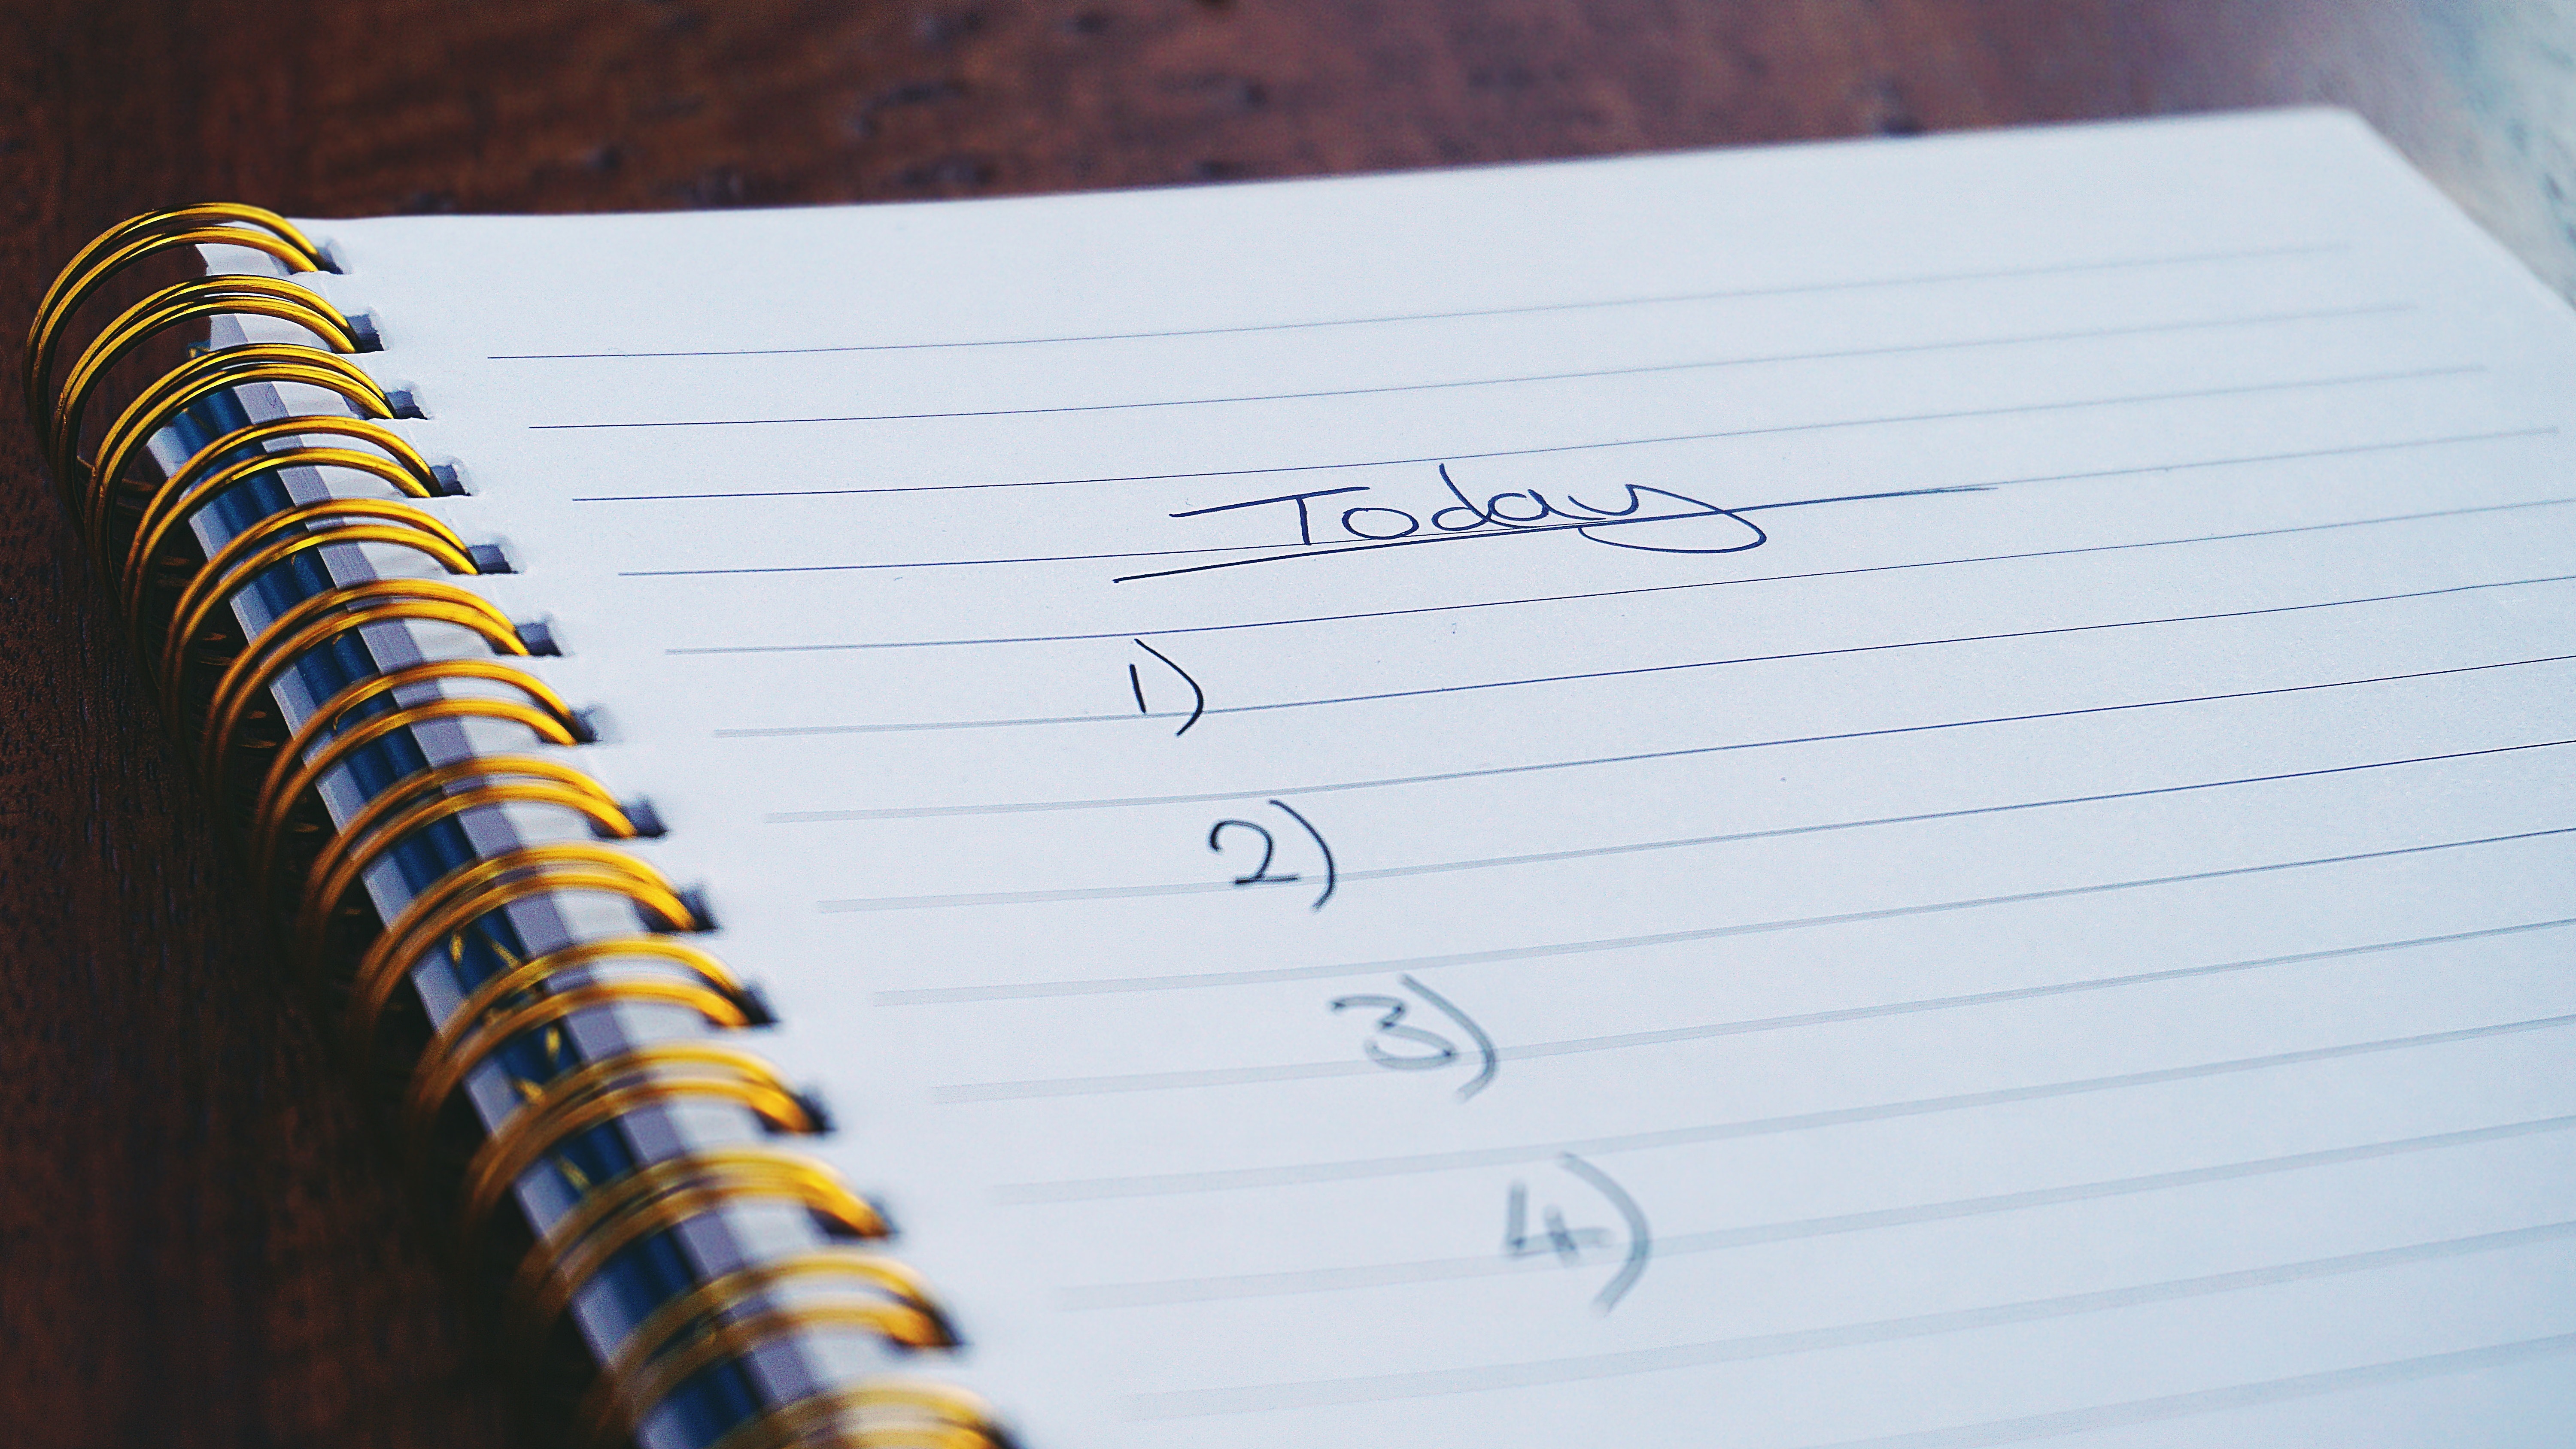 notepad with check-list titled "Today"